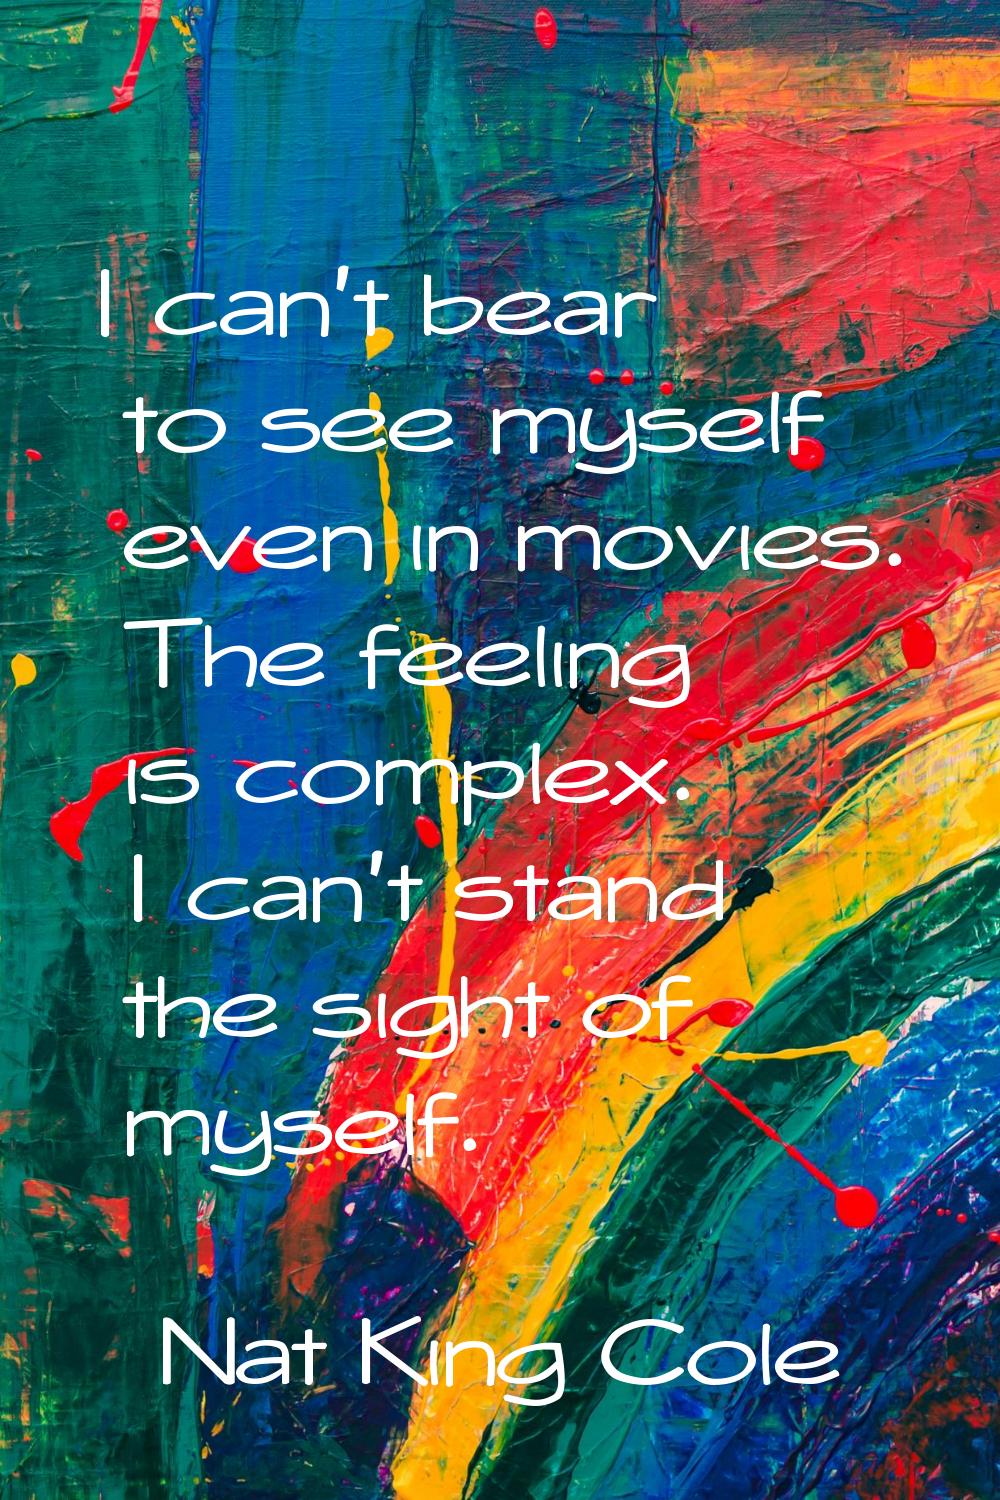 I can't bear to see myself even in movies. The feeling is complex. I can't stand the sight of mysel